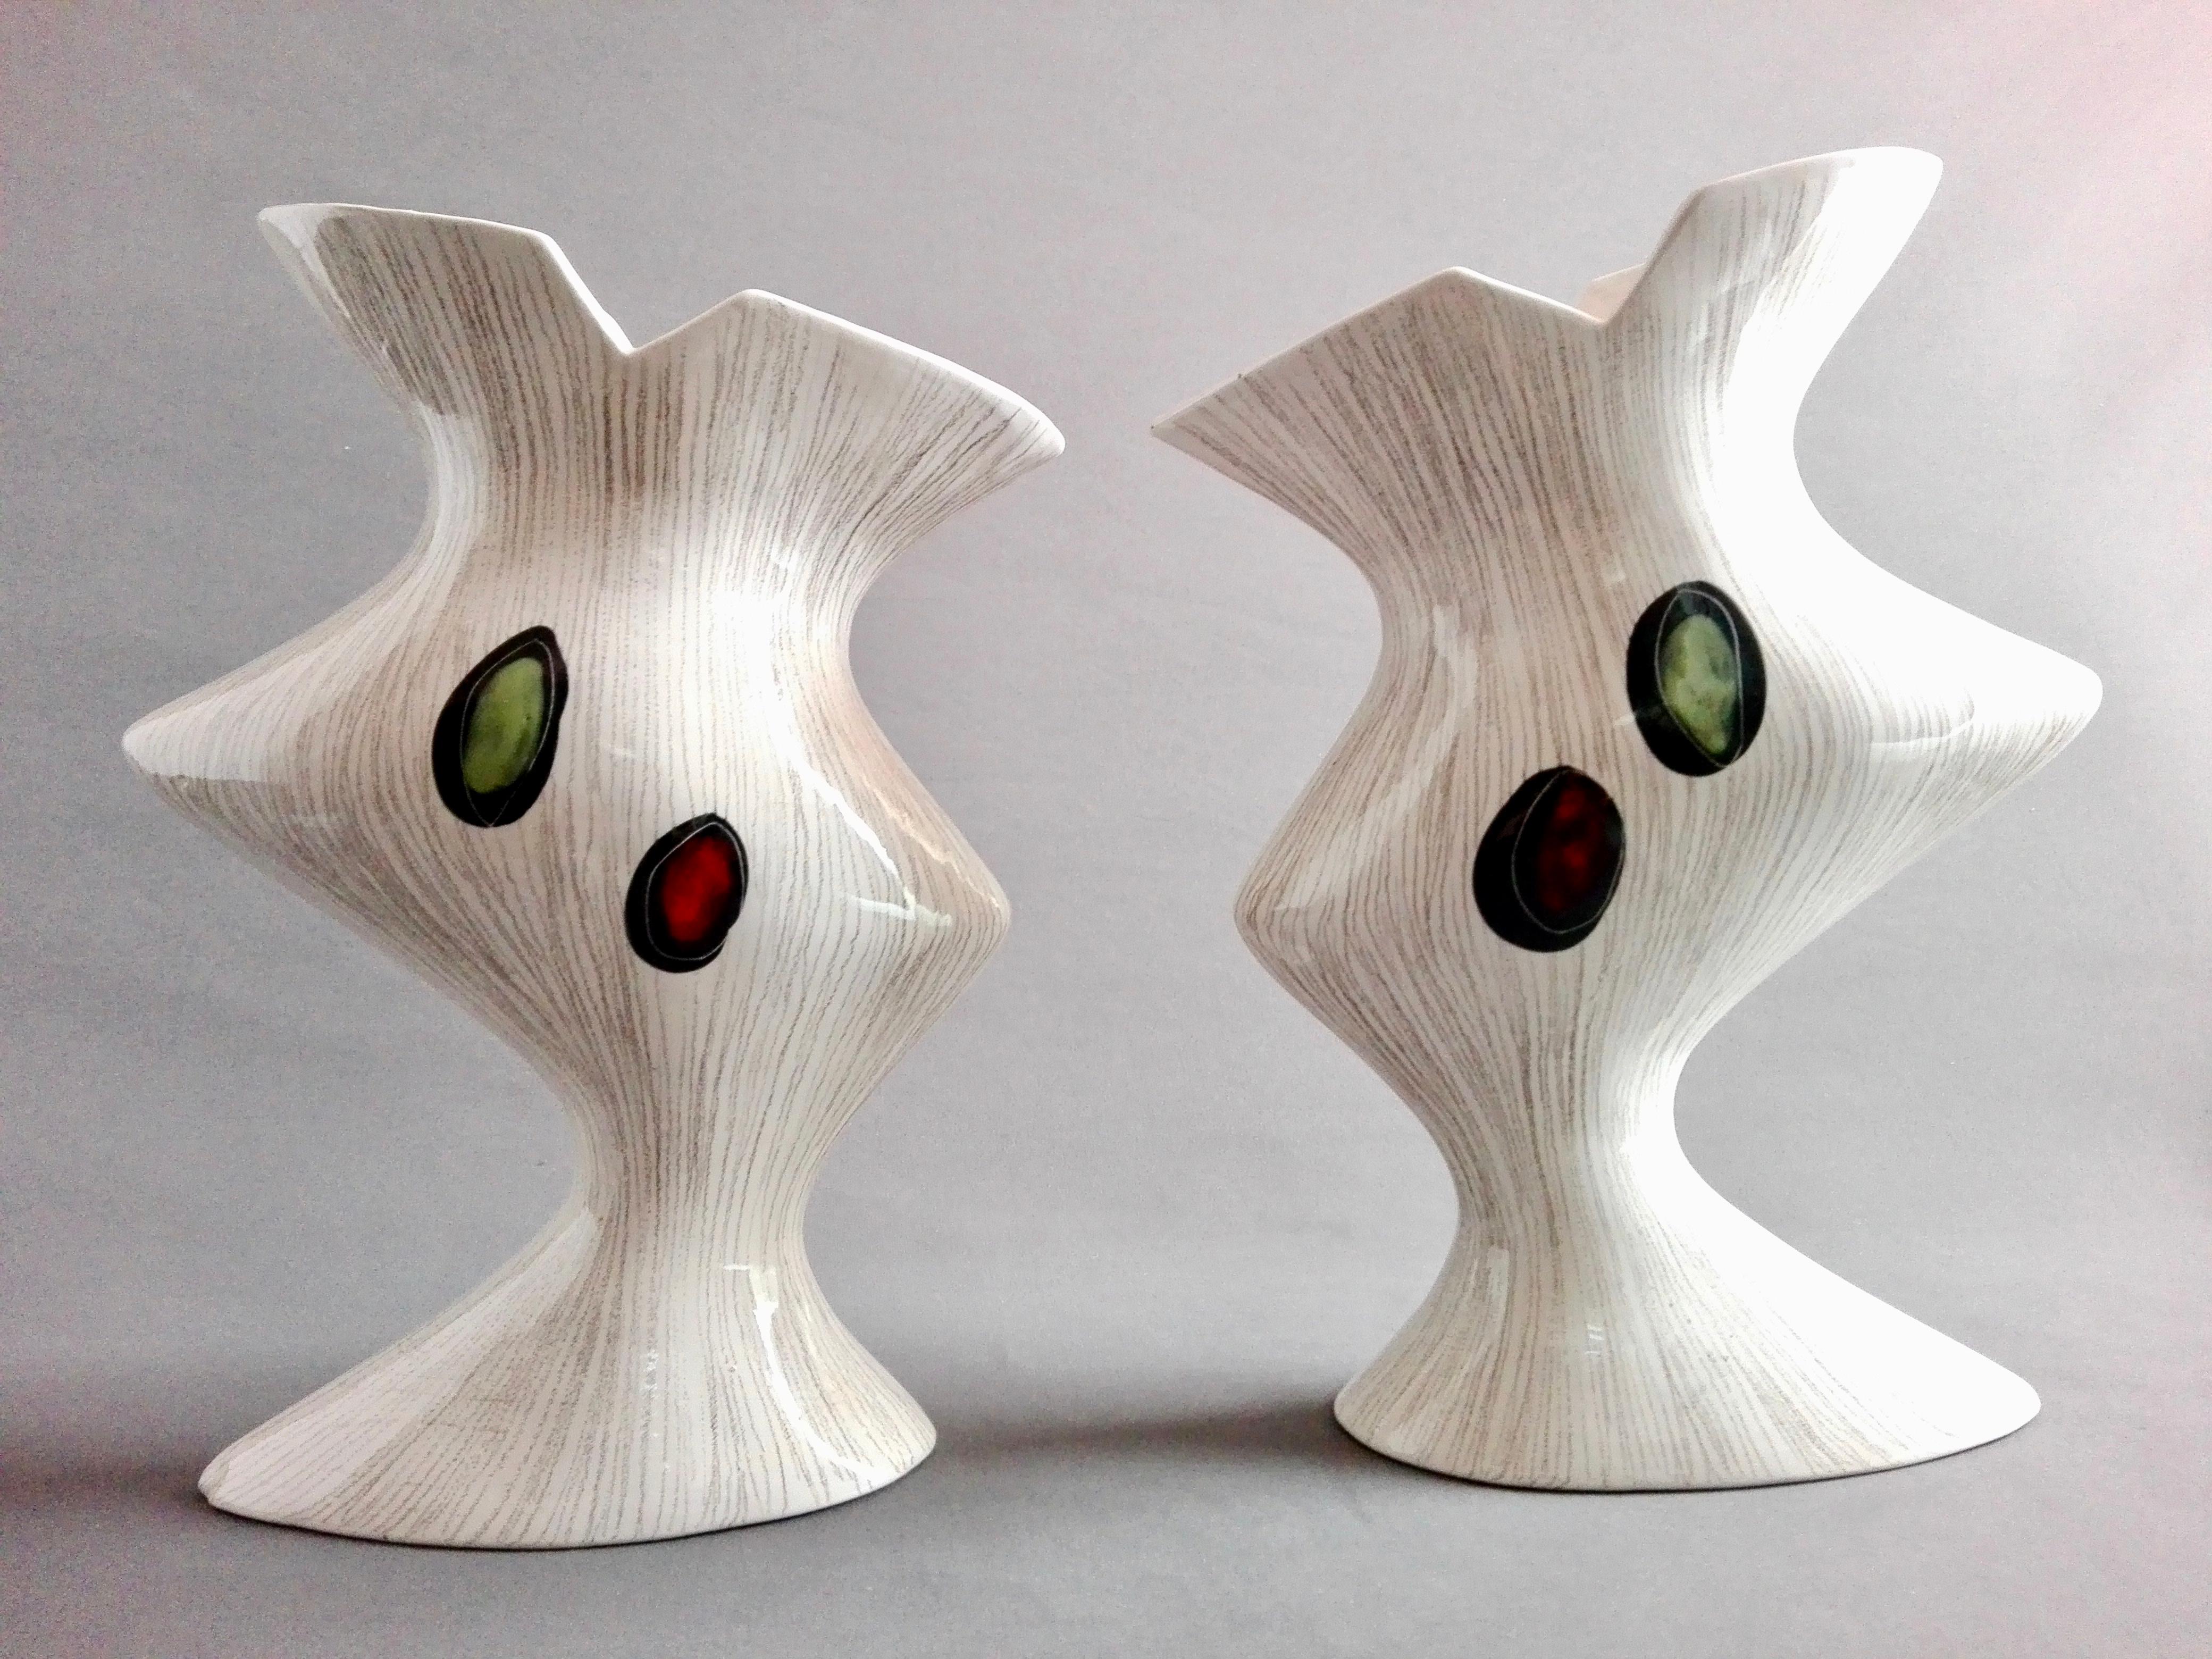 Elegant pair of asymmetrical multicolored decorated white Italian ceramic vases from the late 1950s-early 1960s. They have a mirrored shape with decorative double-sided hand-made subjects.
The decoration was done using glazed colours and sgraffito